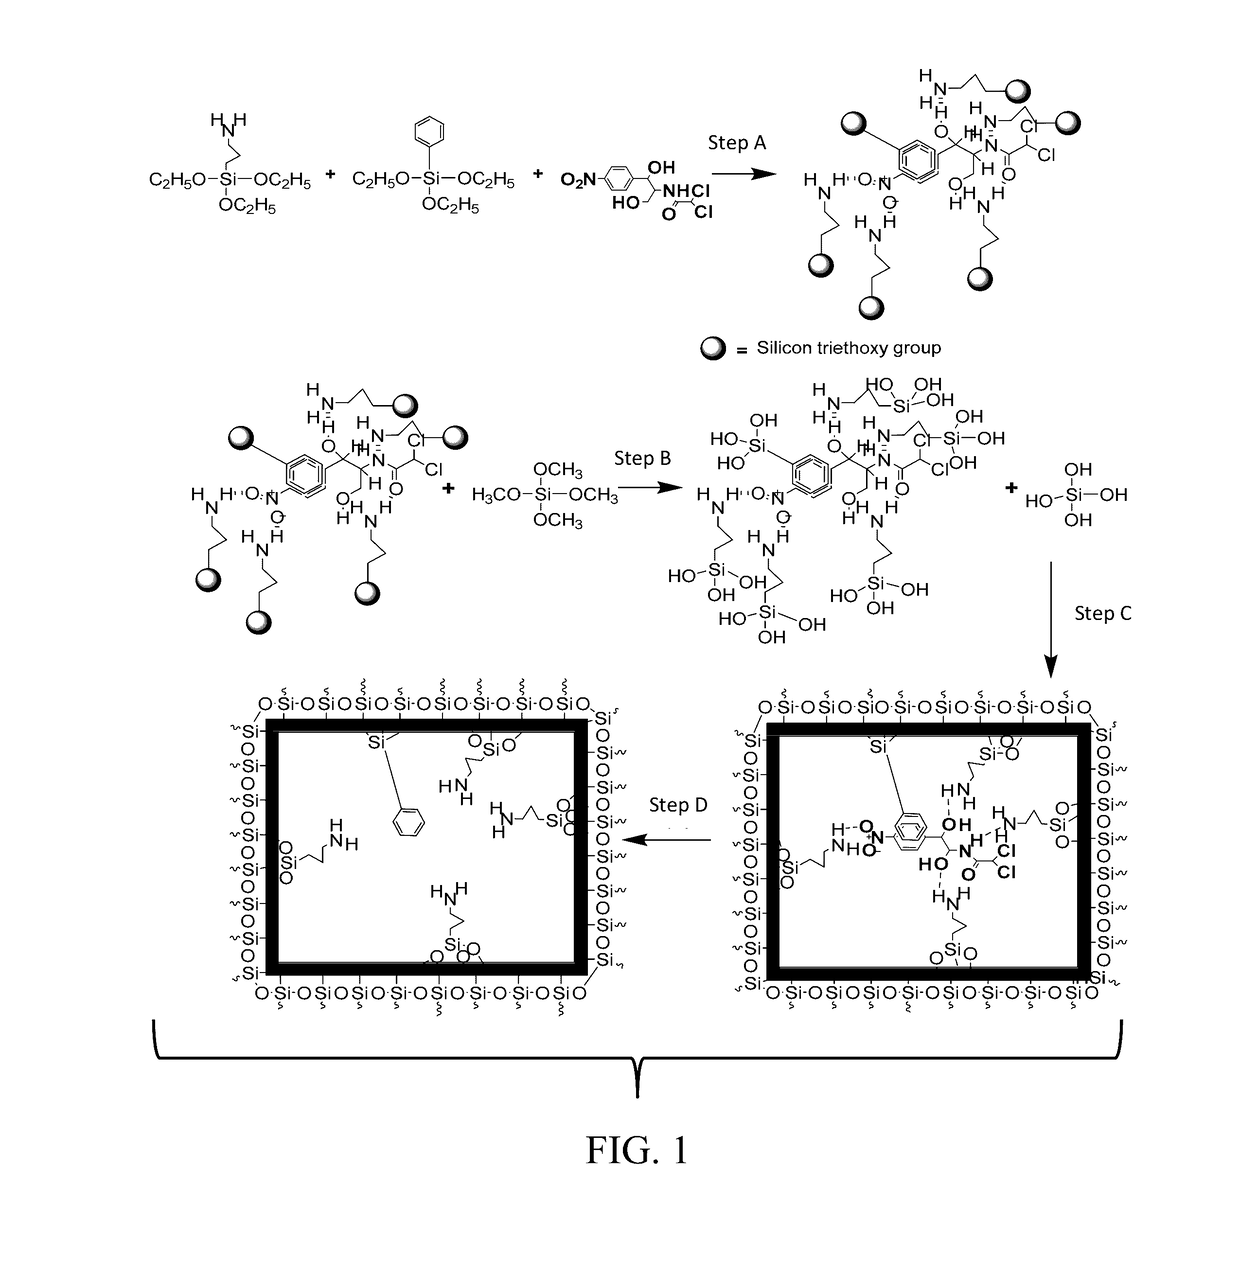 Materials and methods for the detection of trace amounts of substances in biological and environmental samples